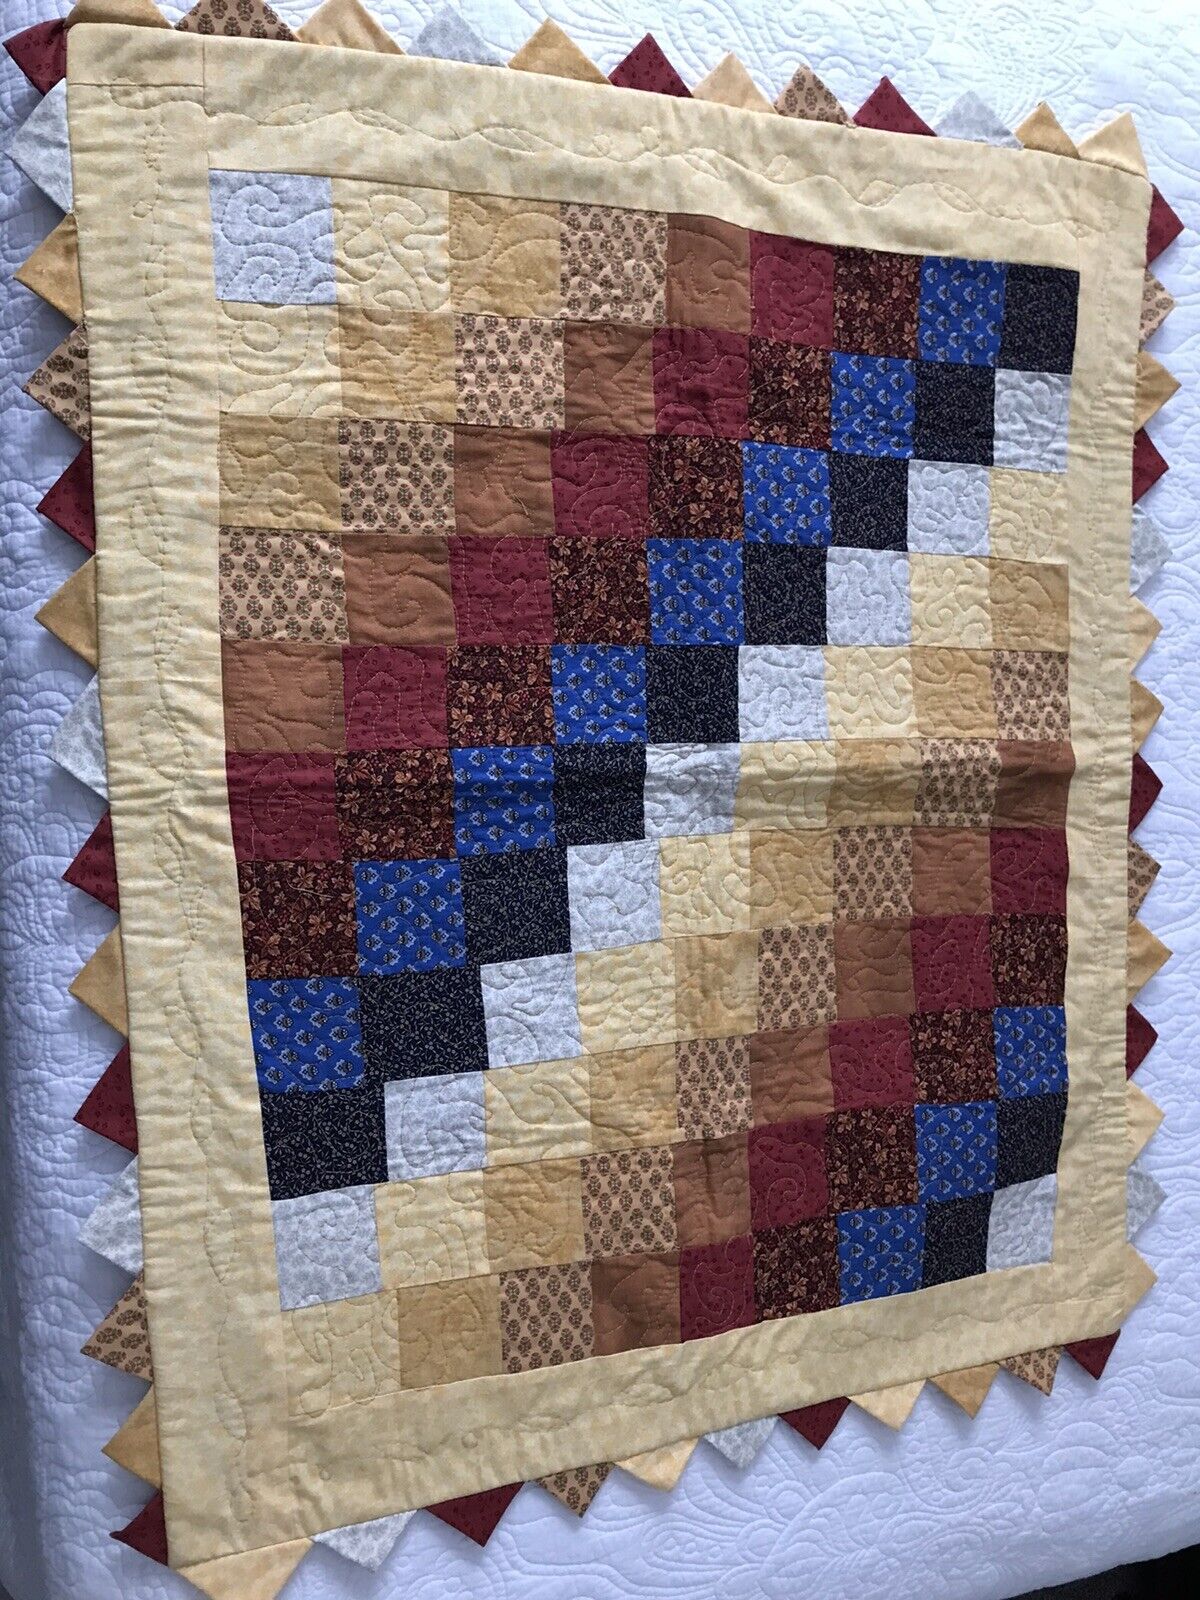 Quilt, Handmade Quilted Table Topper With Prairie Points, In Warm Colors